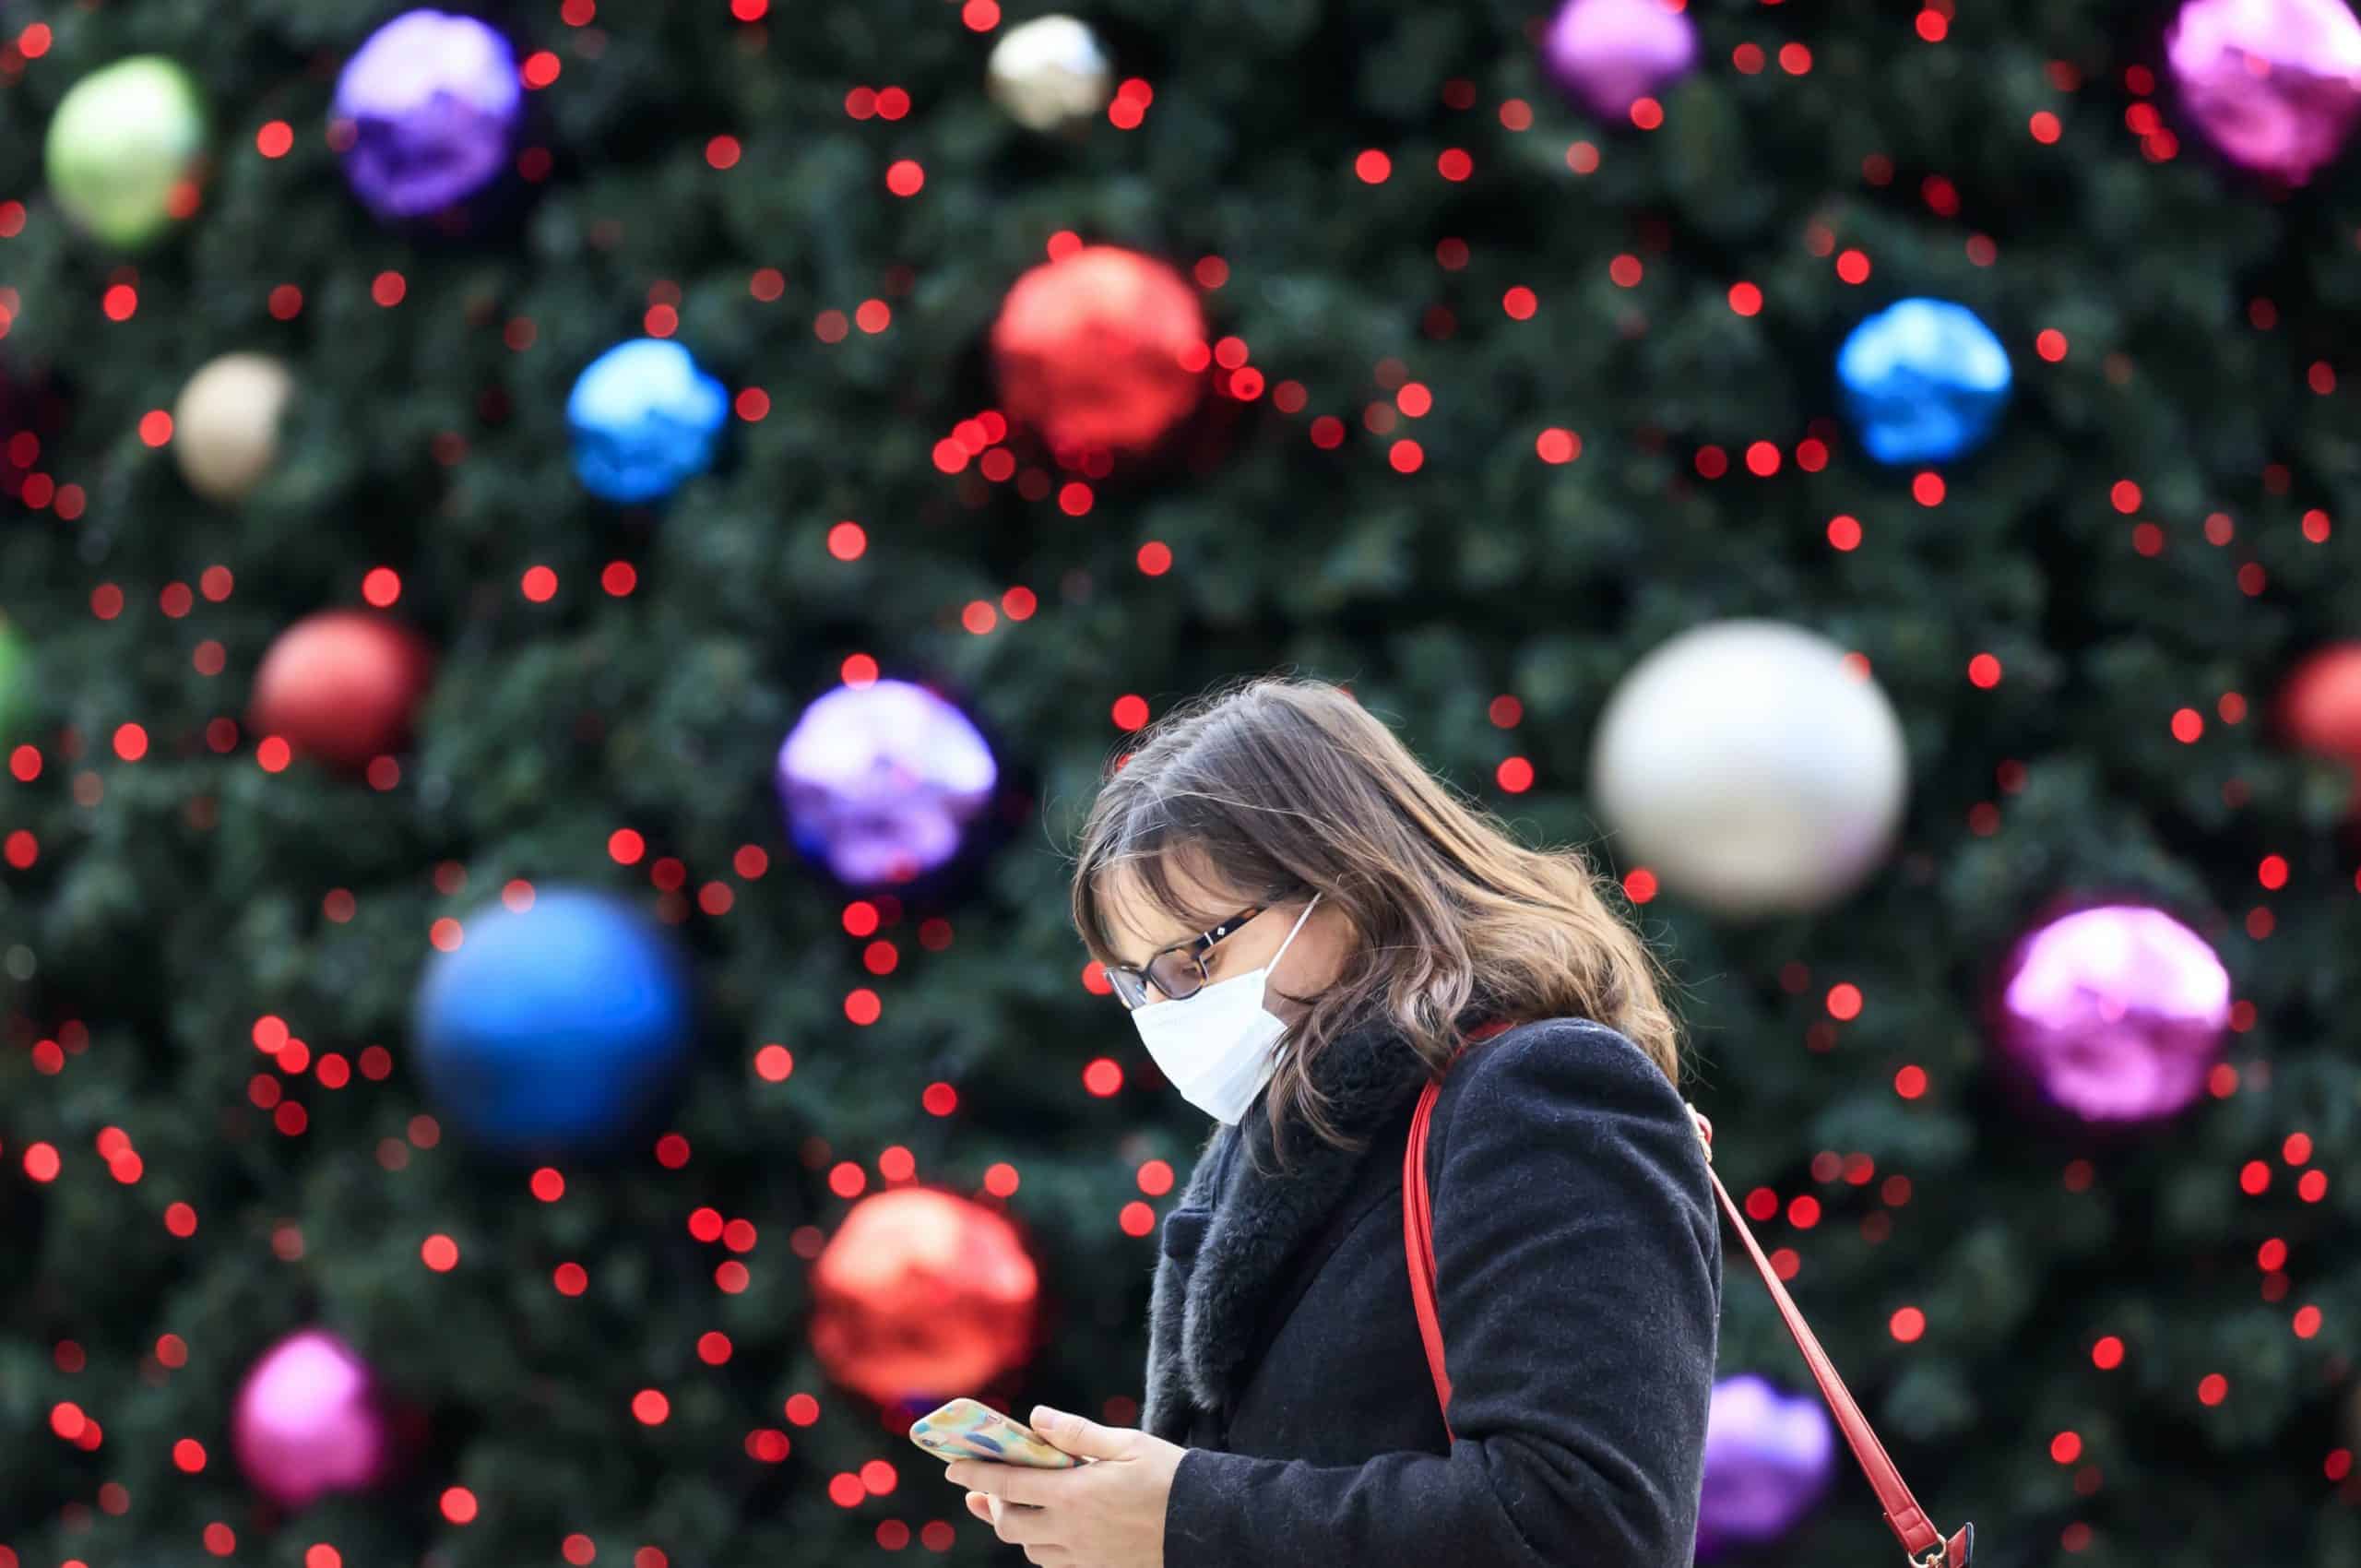 Christmas free-for-all could double infection rates, SAGE warns